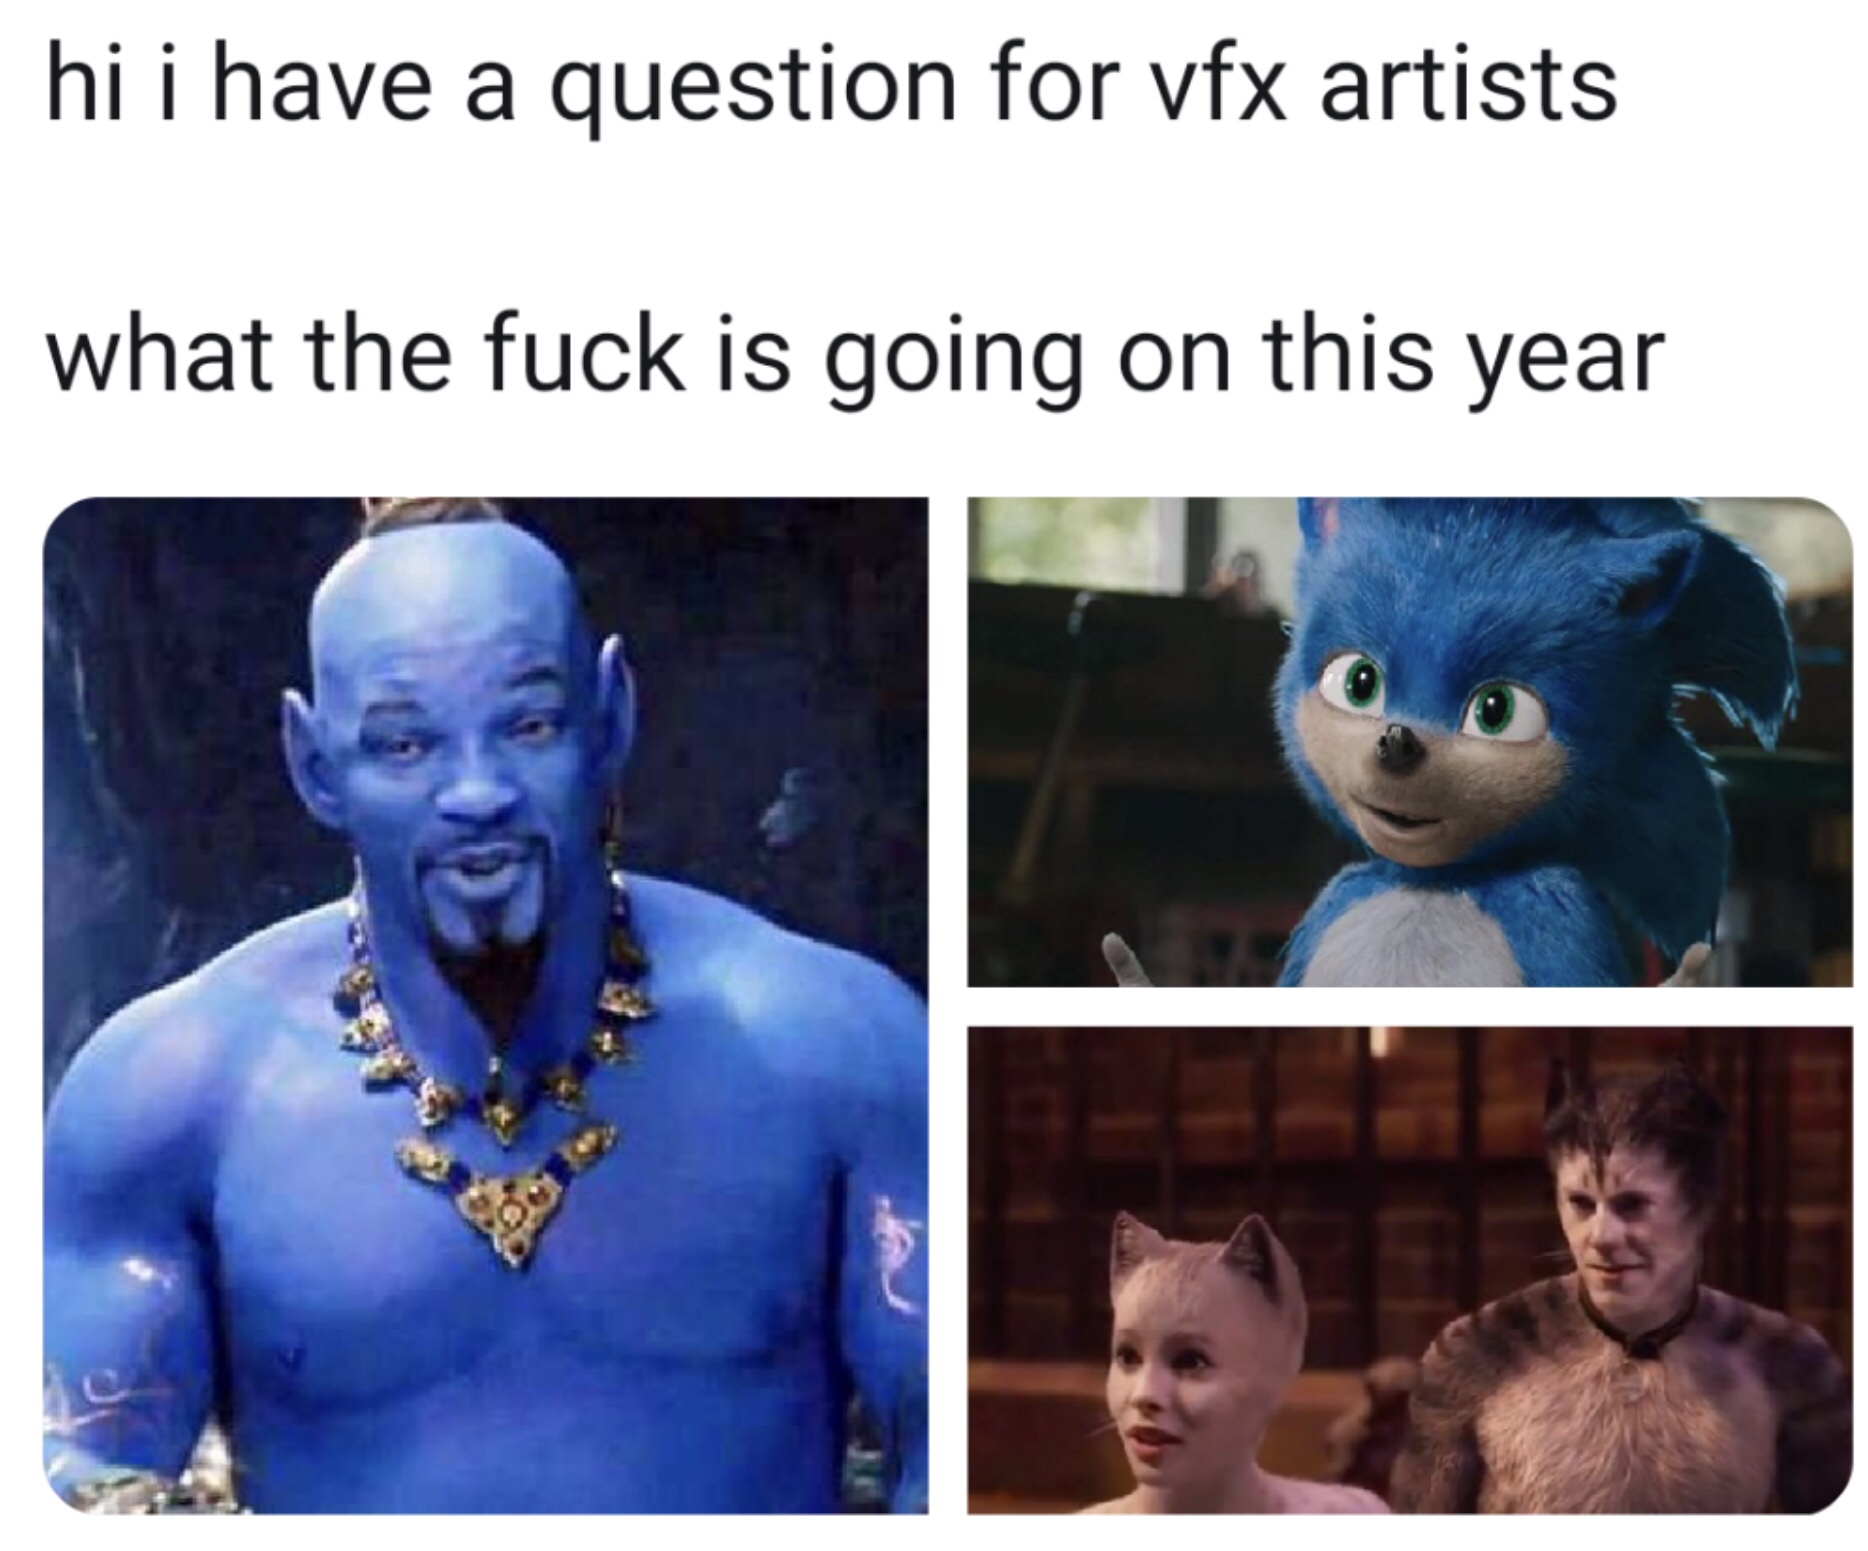 head - hi i have a question for vfx artists what the fuck is going on this year